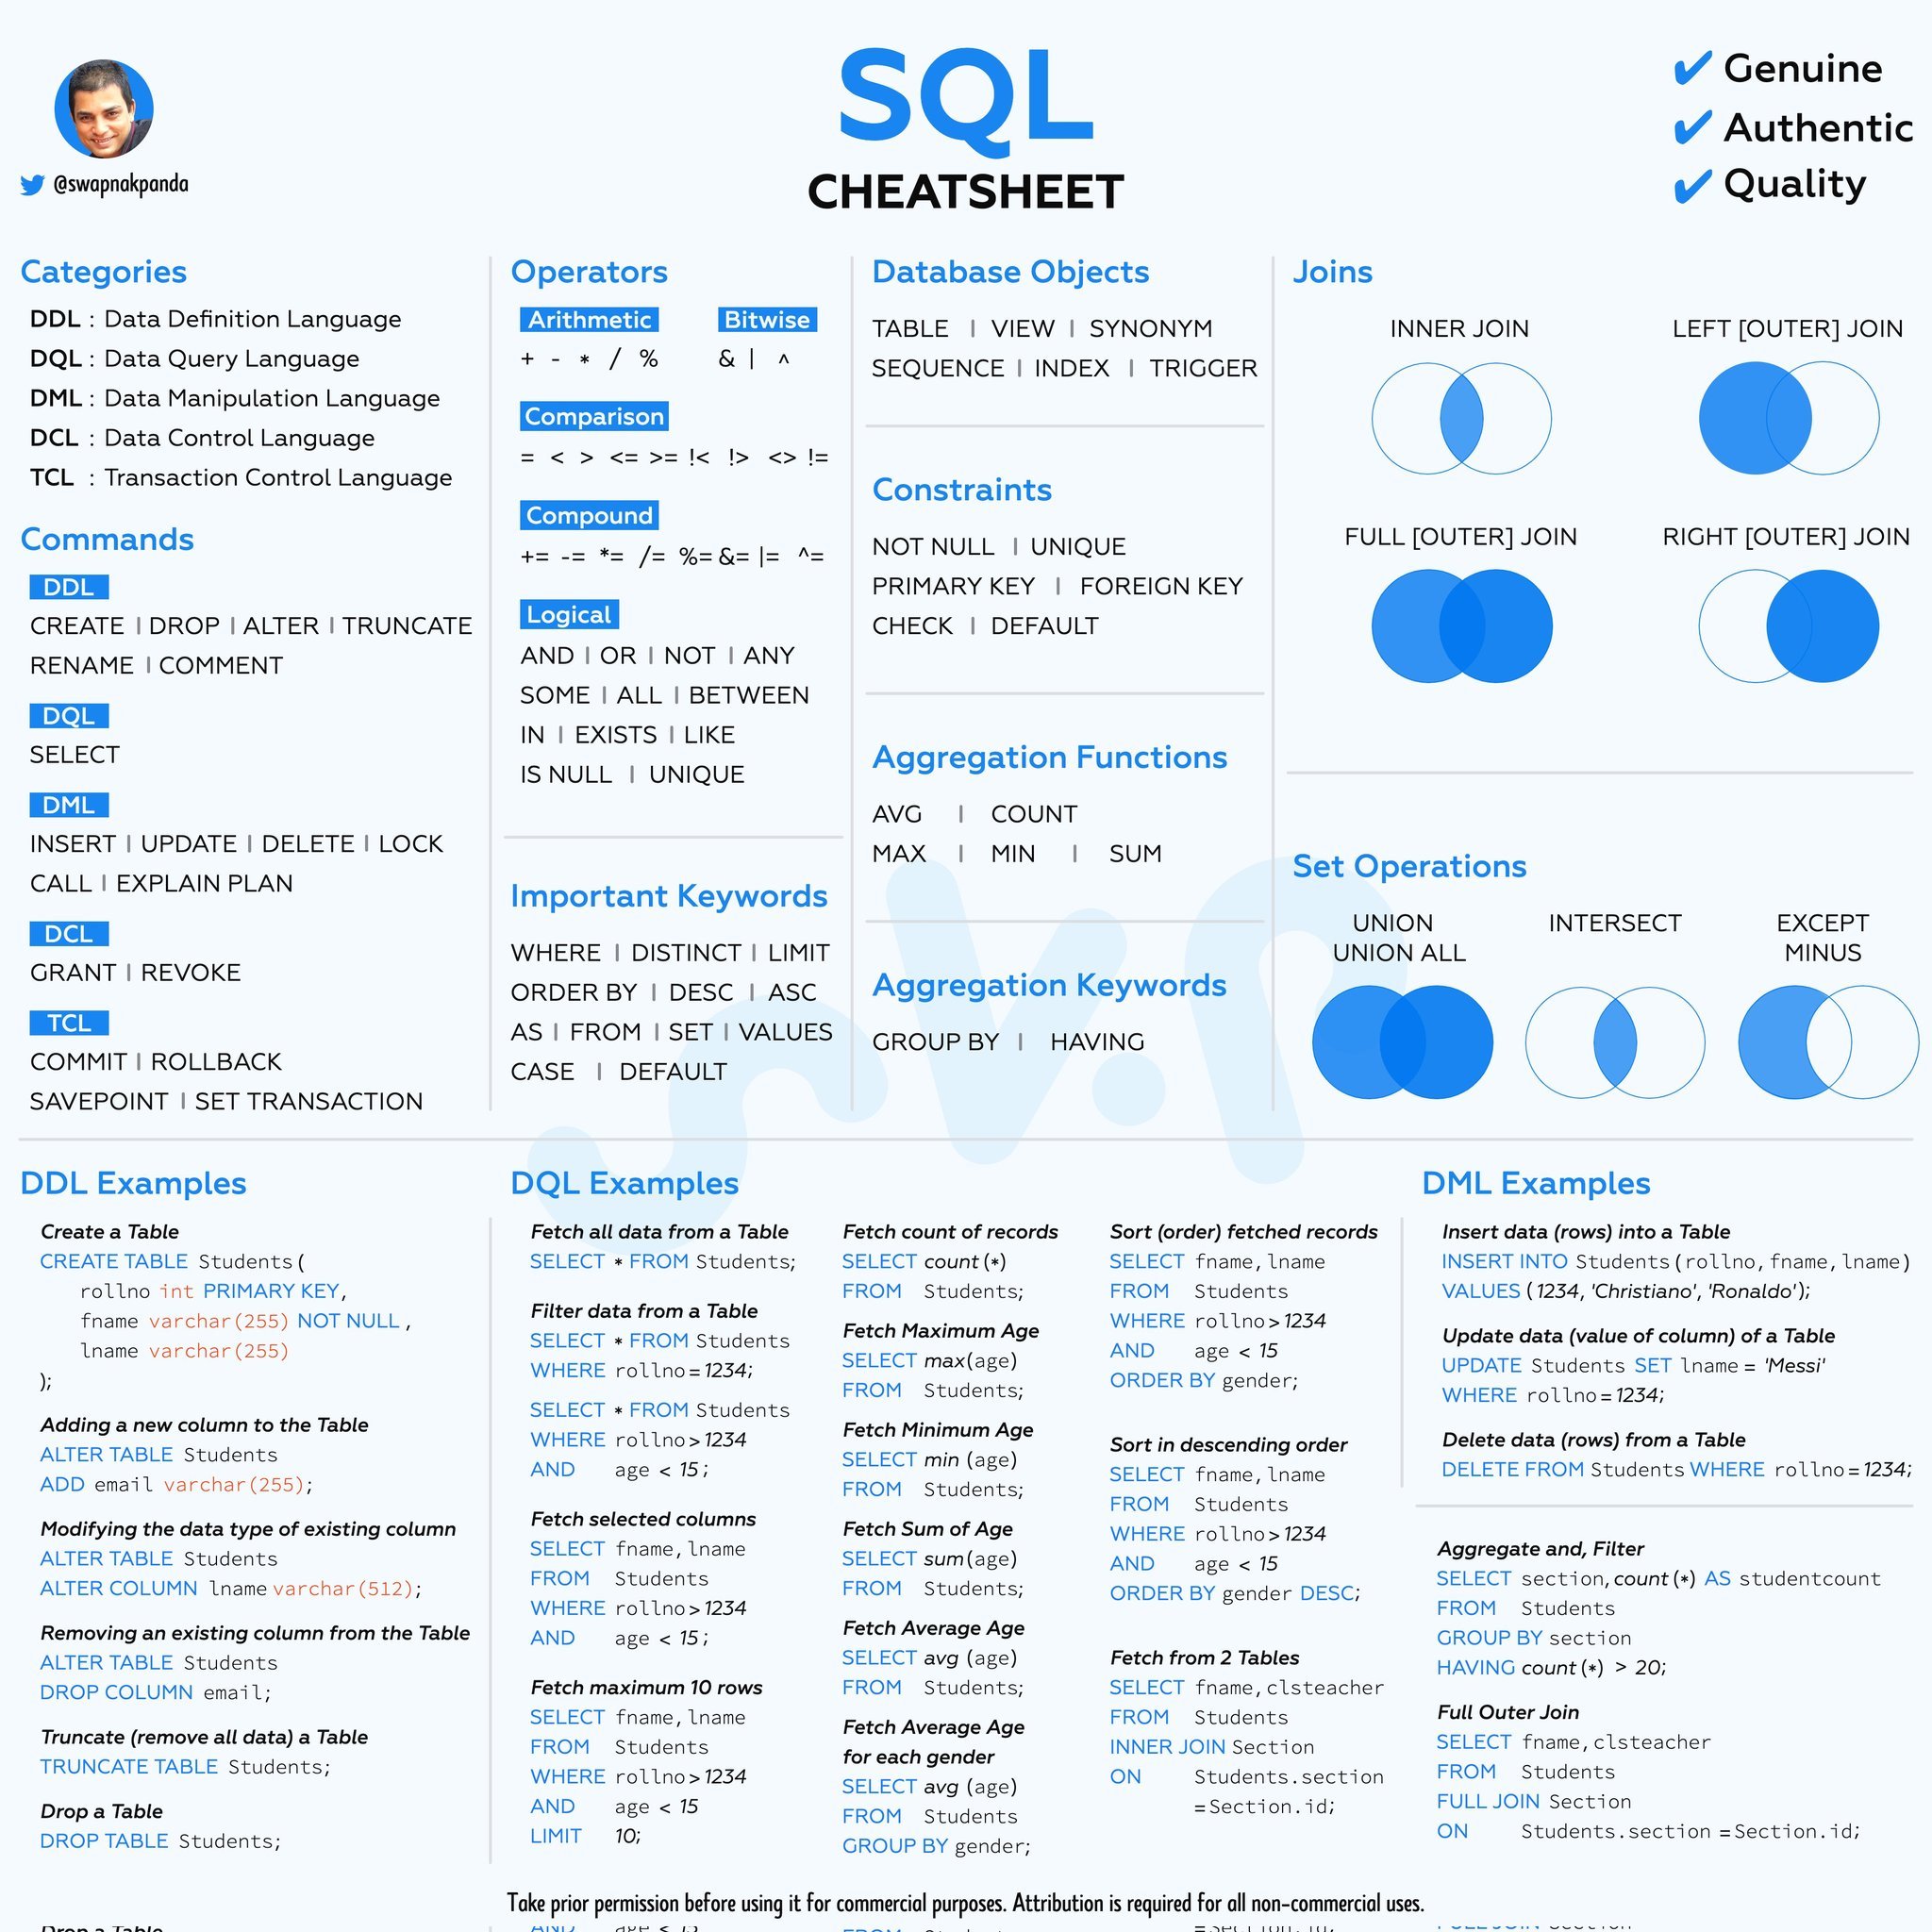 Hacking Articles on X: Best of SQL Cheat Sheet Credit @swapnakpanda  #infosec #cybersecurity #cybersecuritytips #pentesting #oscp  #informationsecurity #cissp #CyberSec #CheatSheet #bugbounty #bugbountytips  #sql #Database  / X